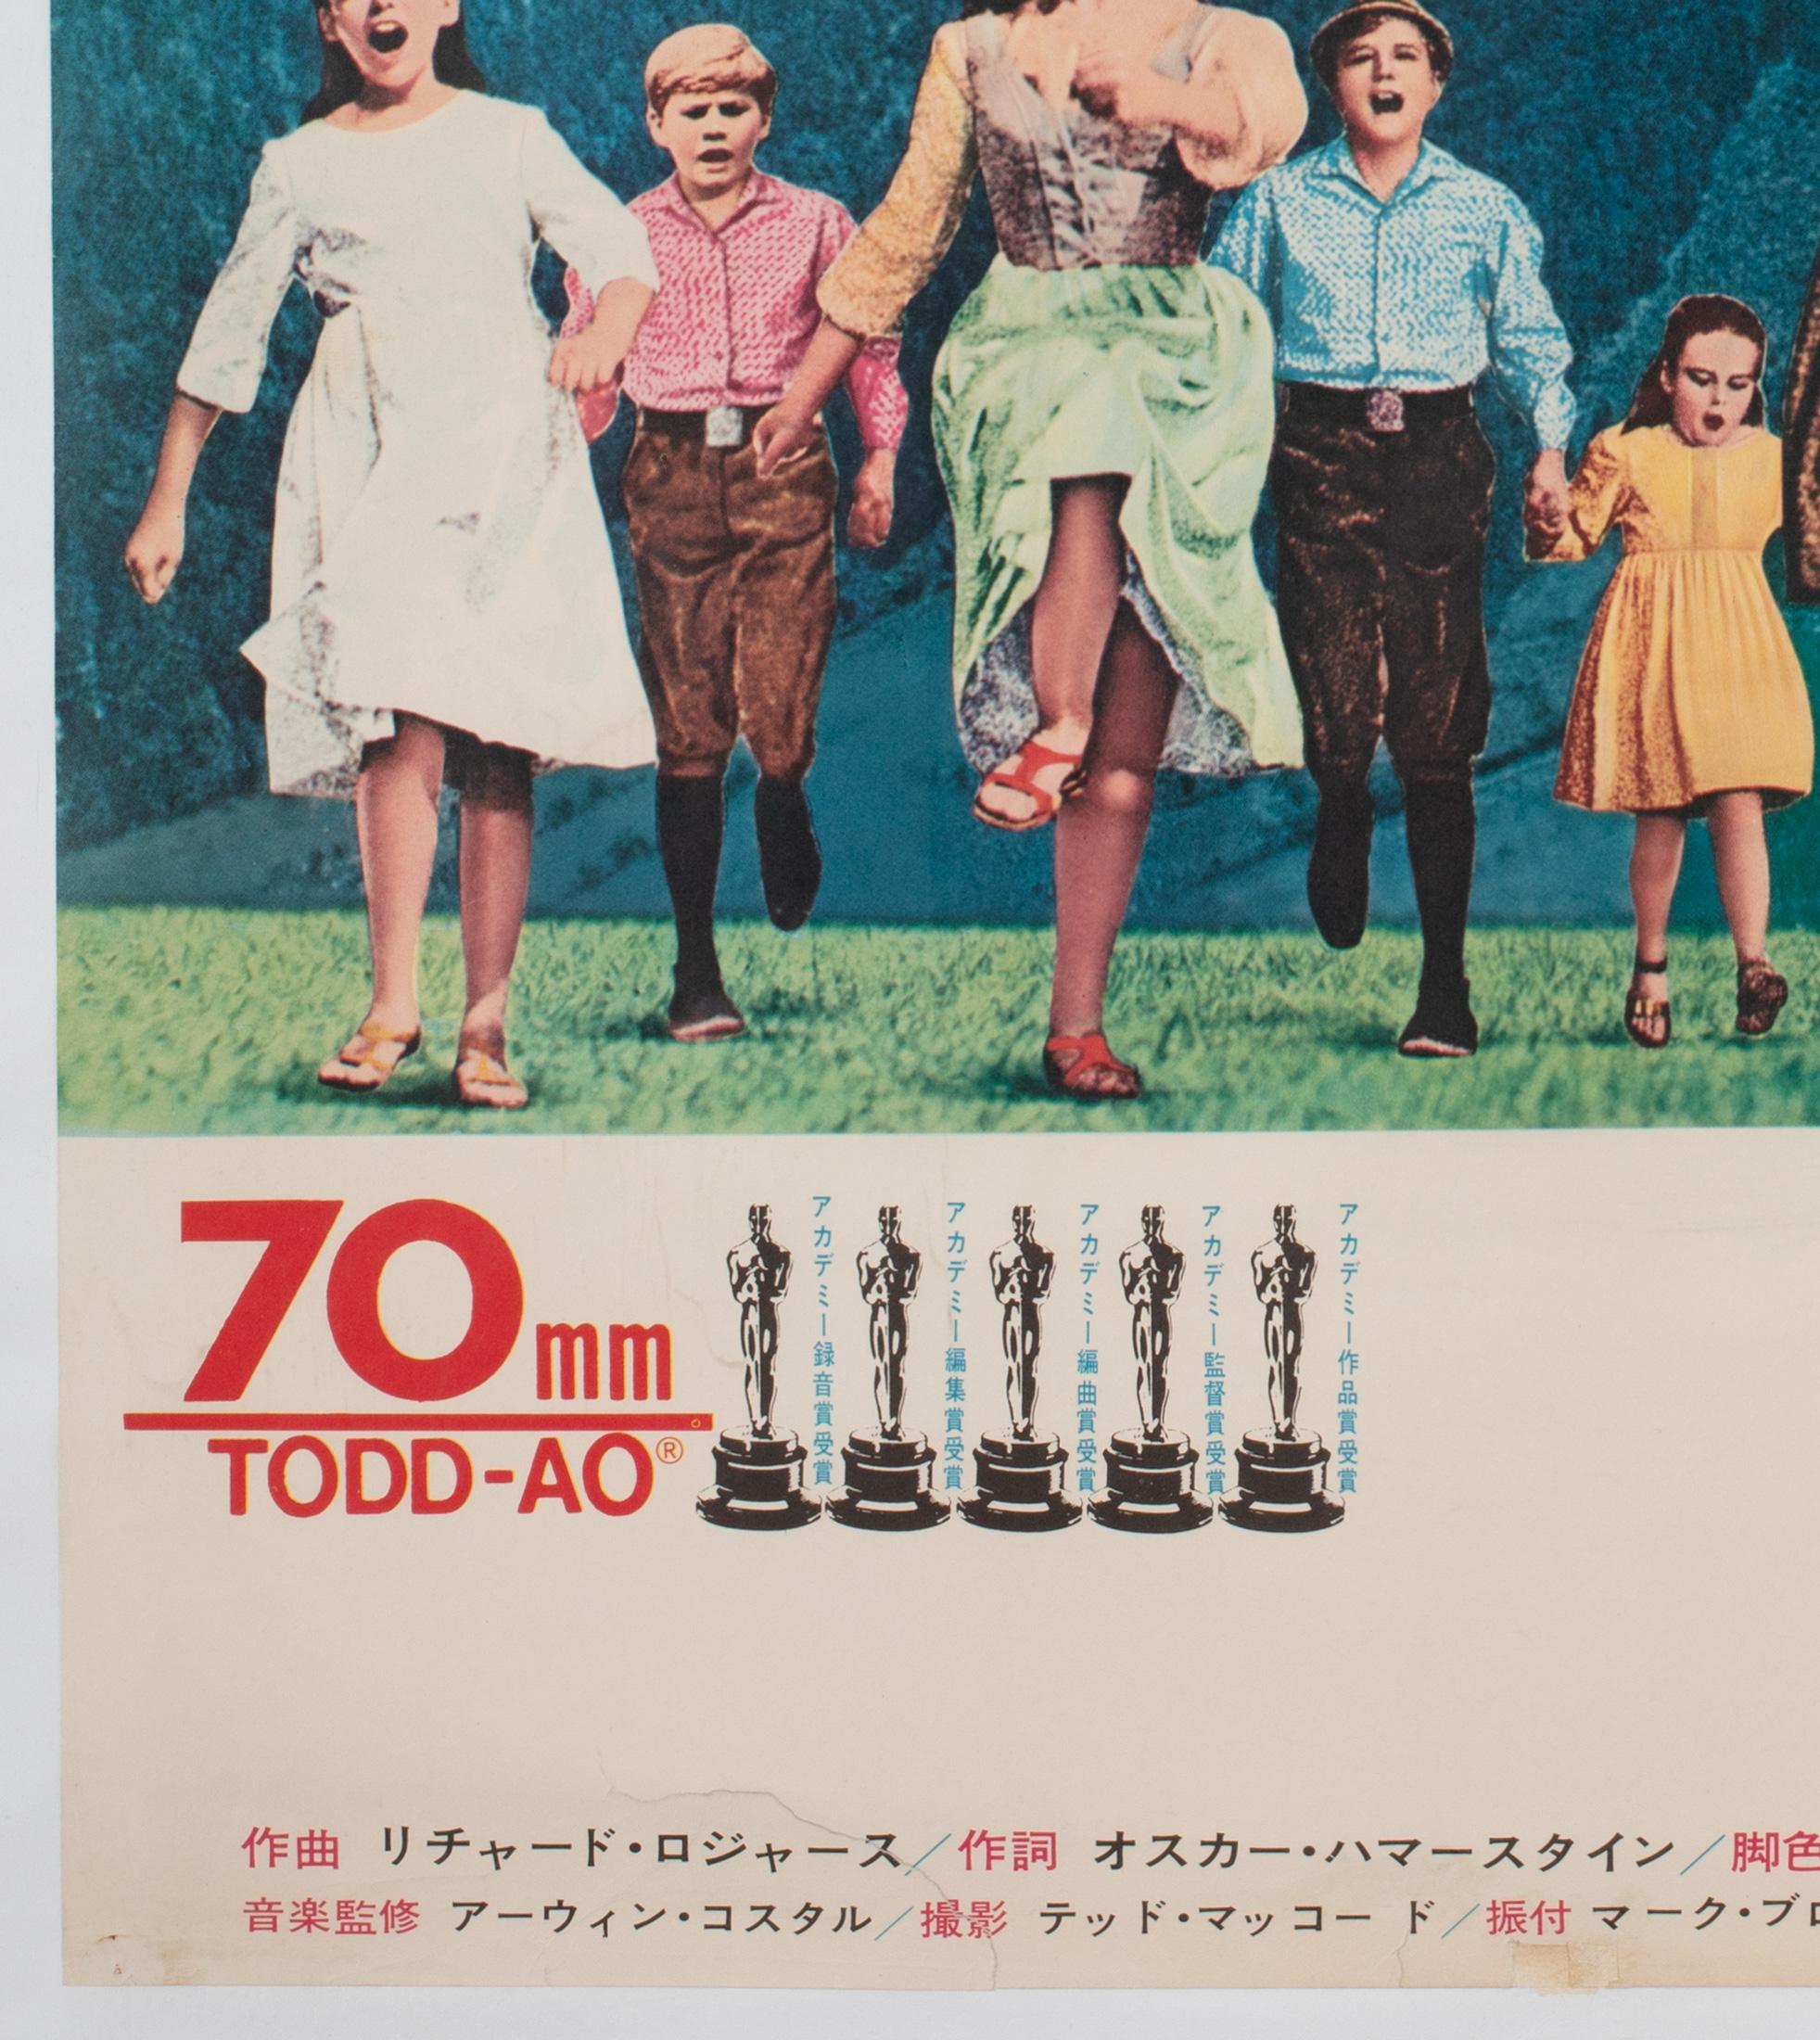 Paper The Sound of Music R1970 Japanese B2 Film Poster